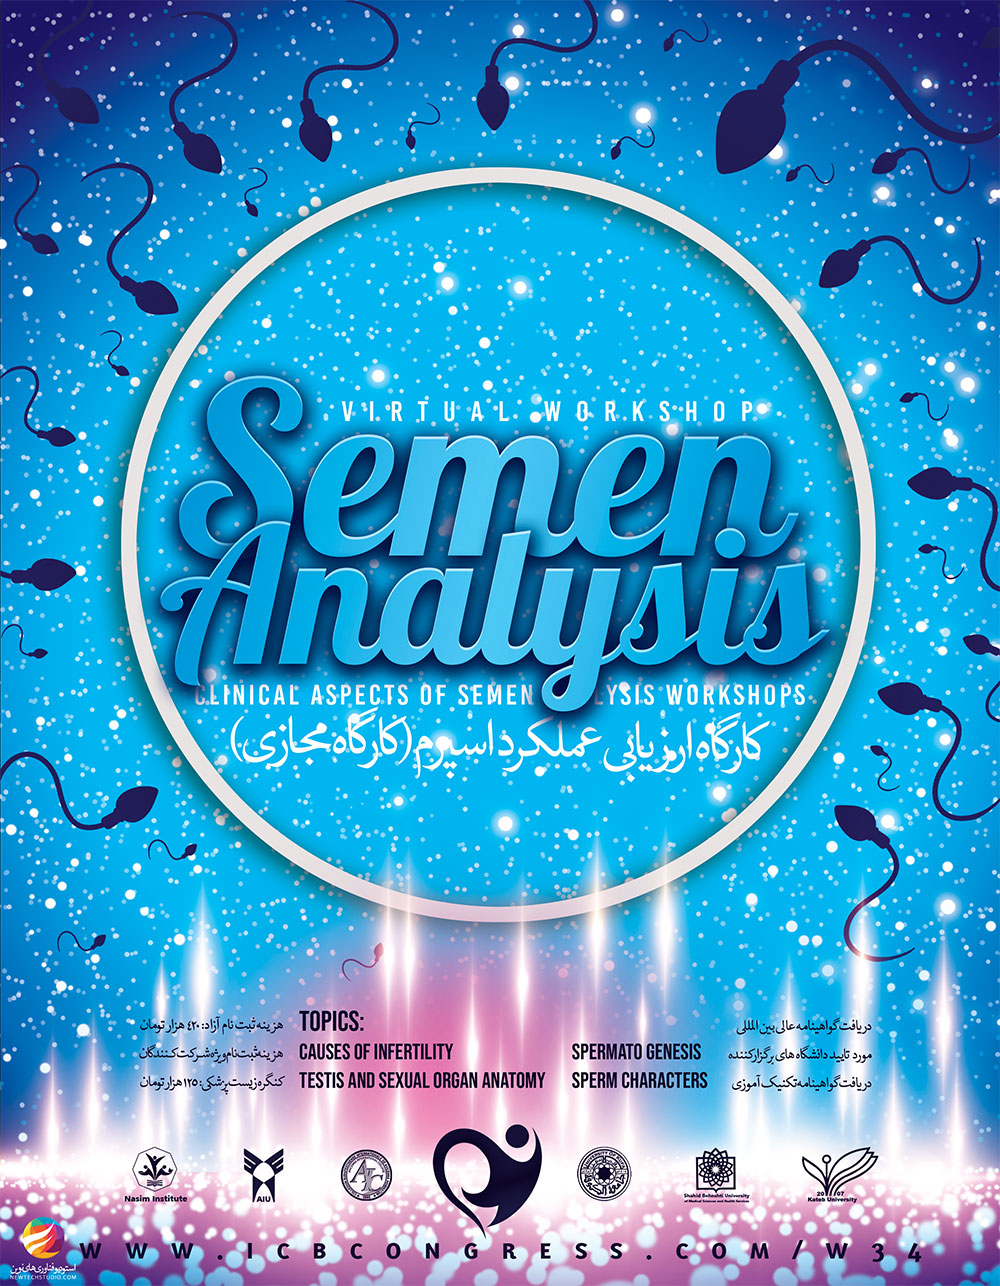 Clinical Aspects of Semen Analysis Workshops